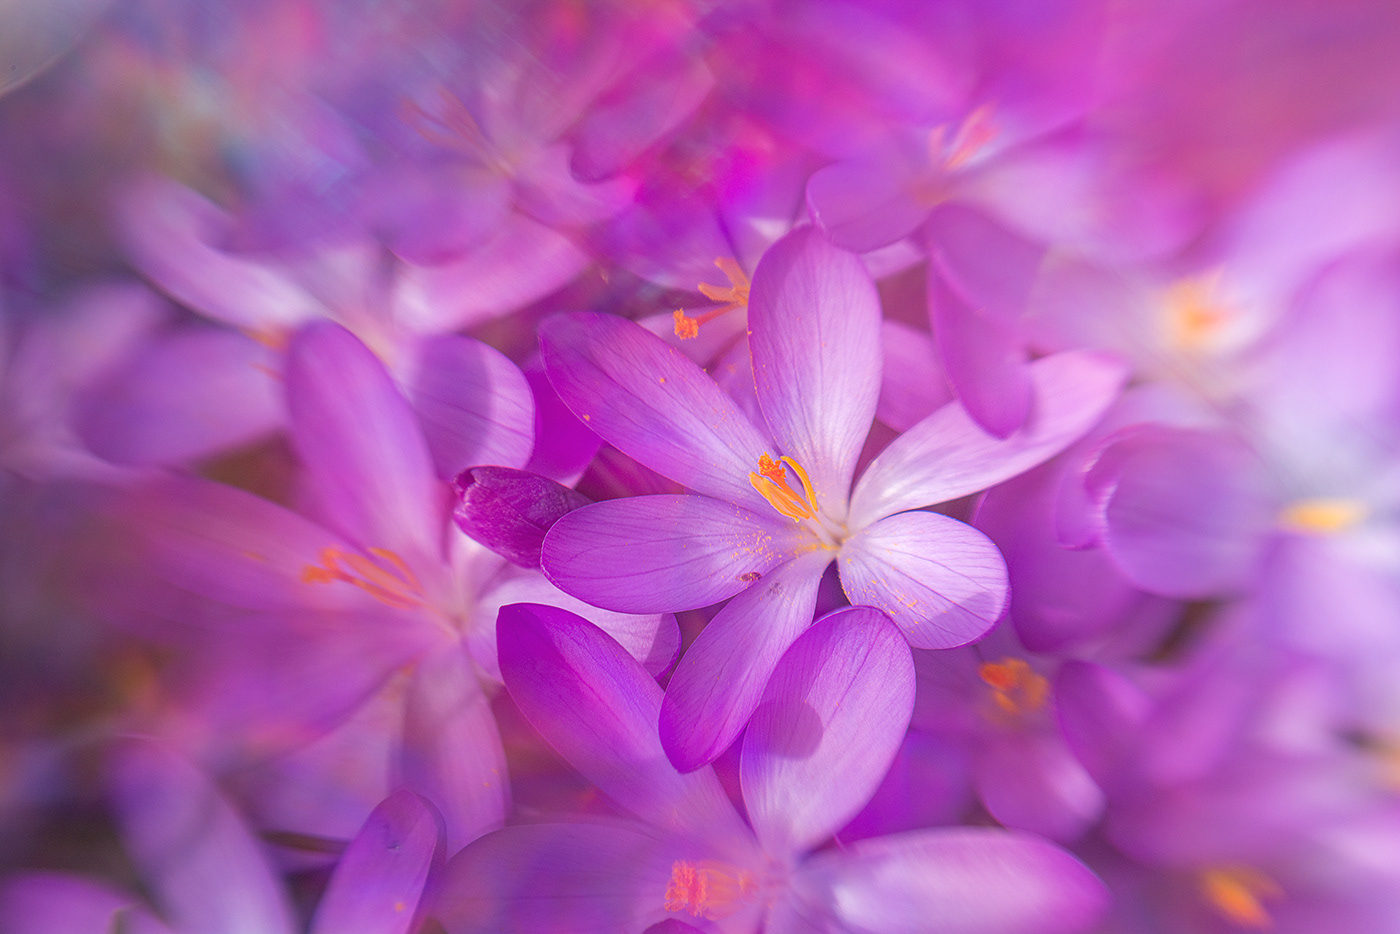 Lilac crocuses photographed with a lensbaby lens and prisms.